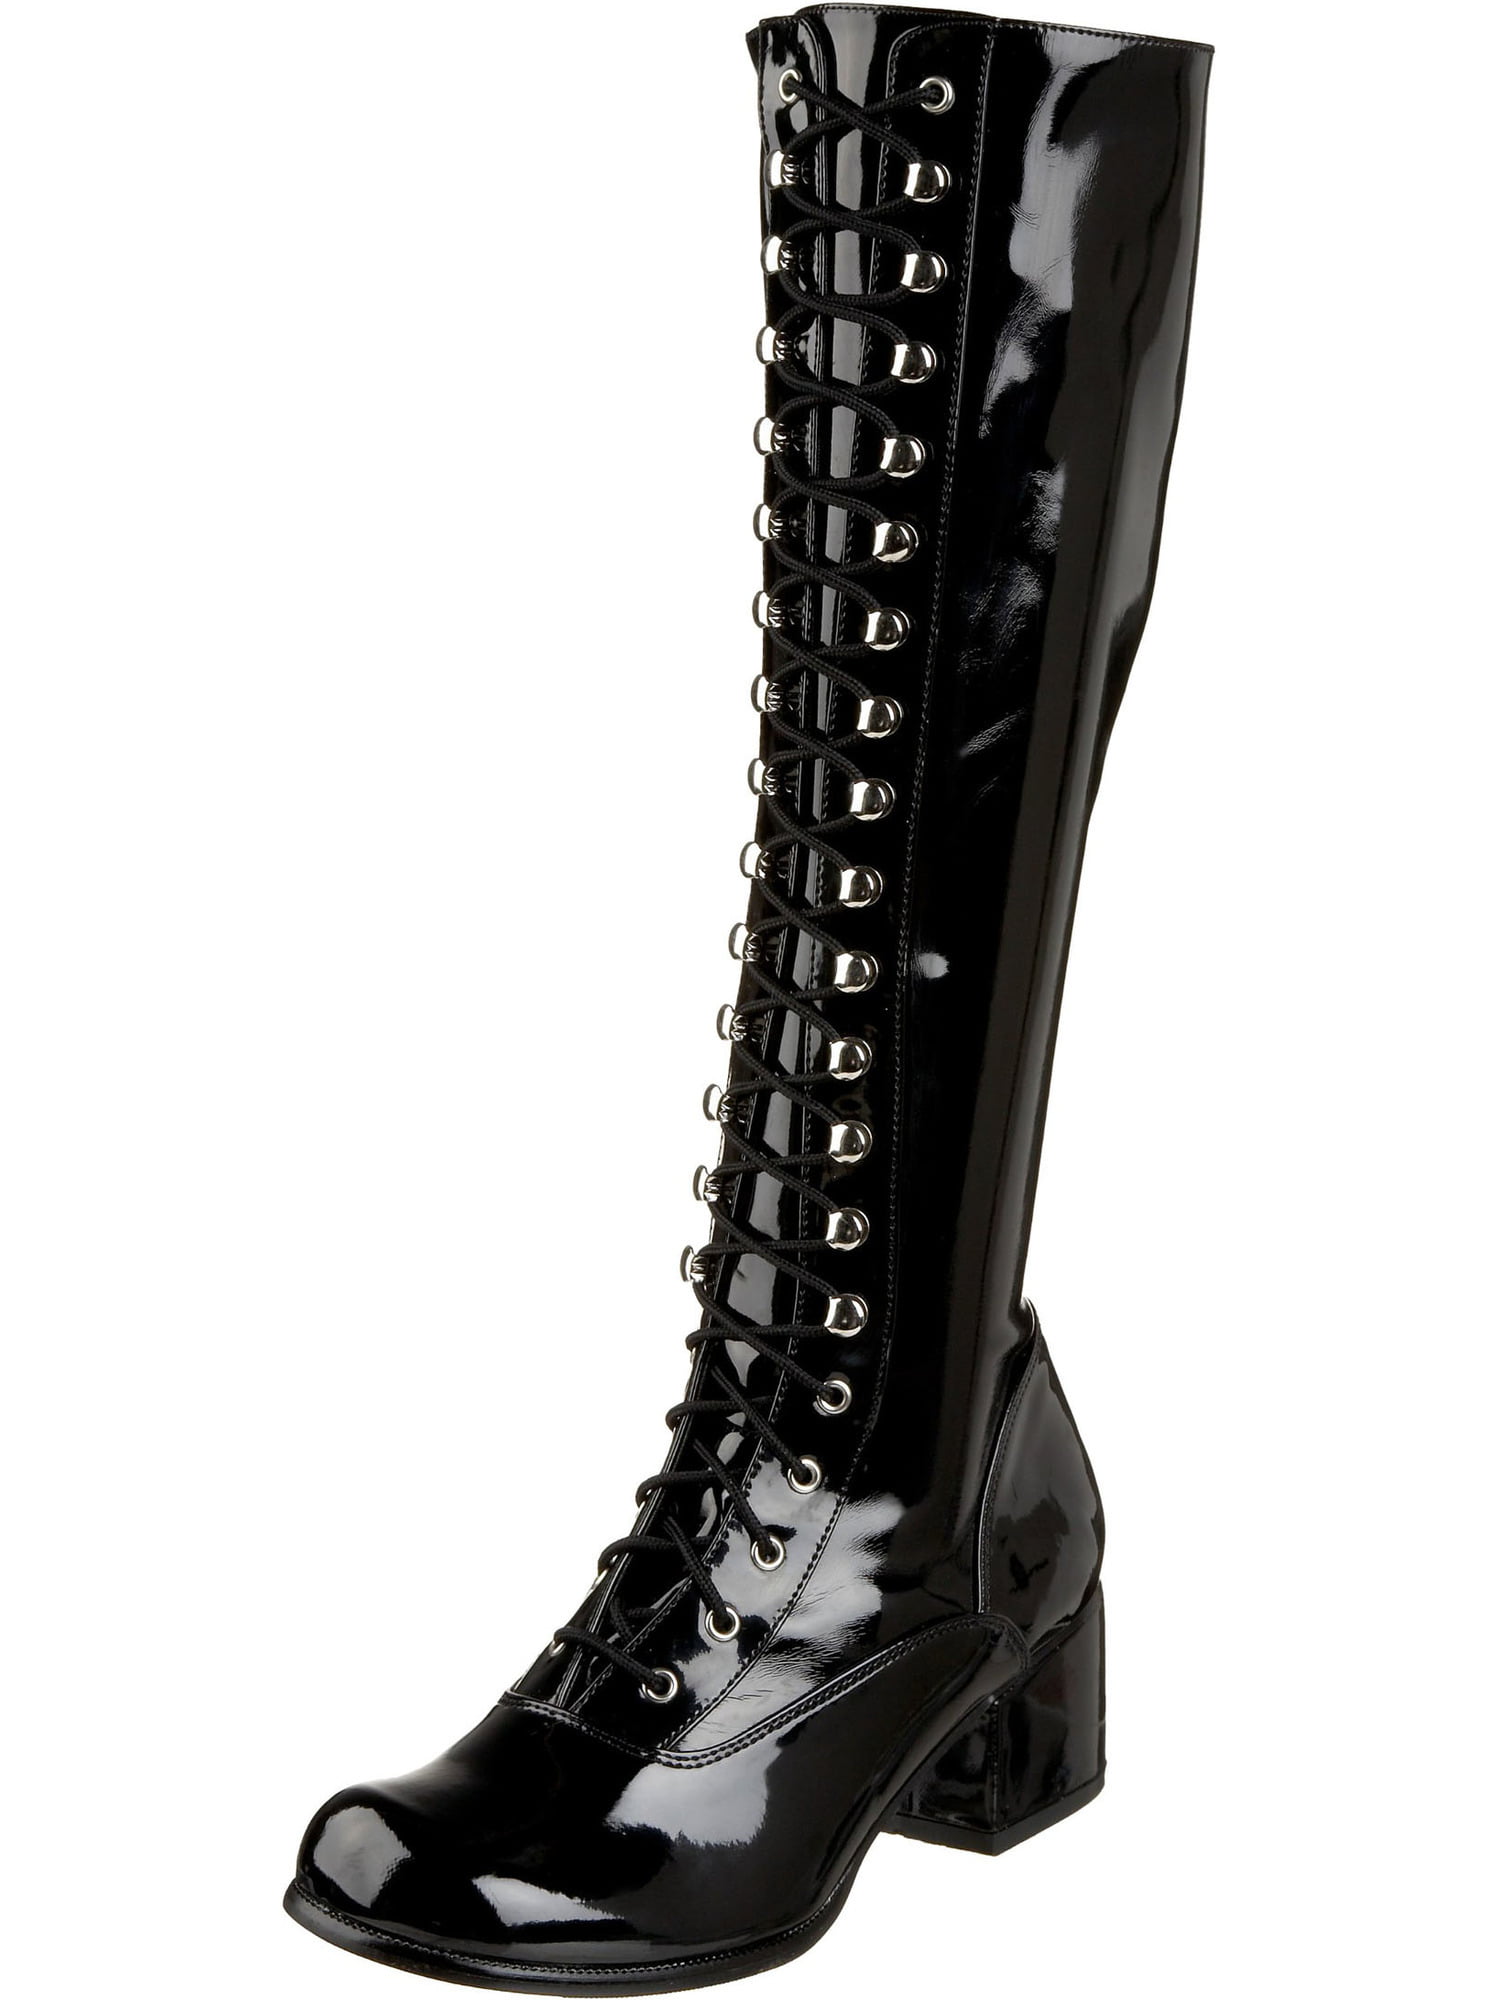 SummitFashions Womens Combat Boots Black Knee High Lace